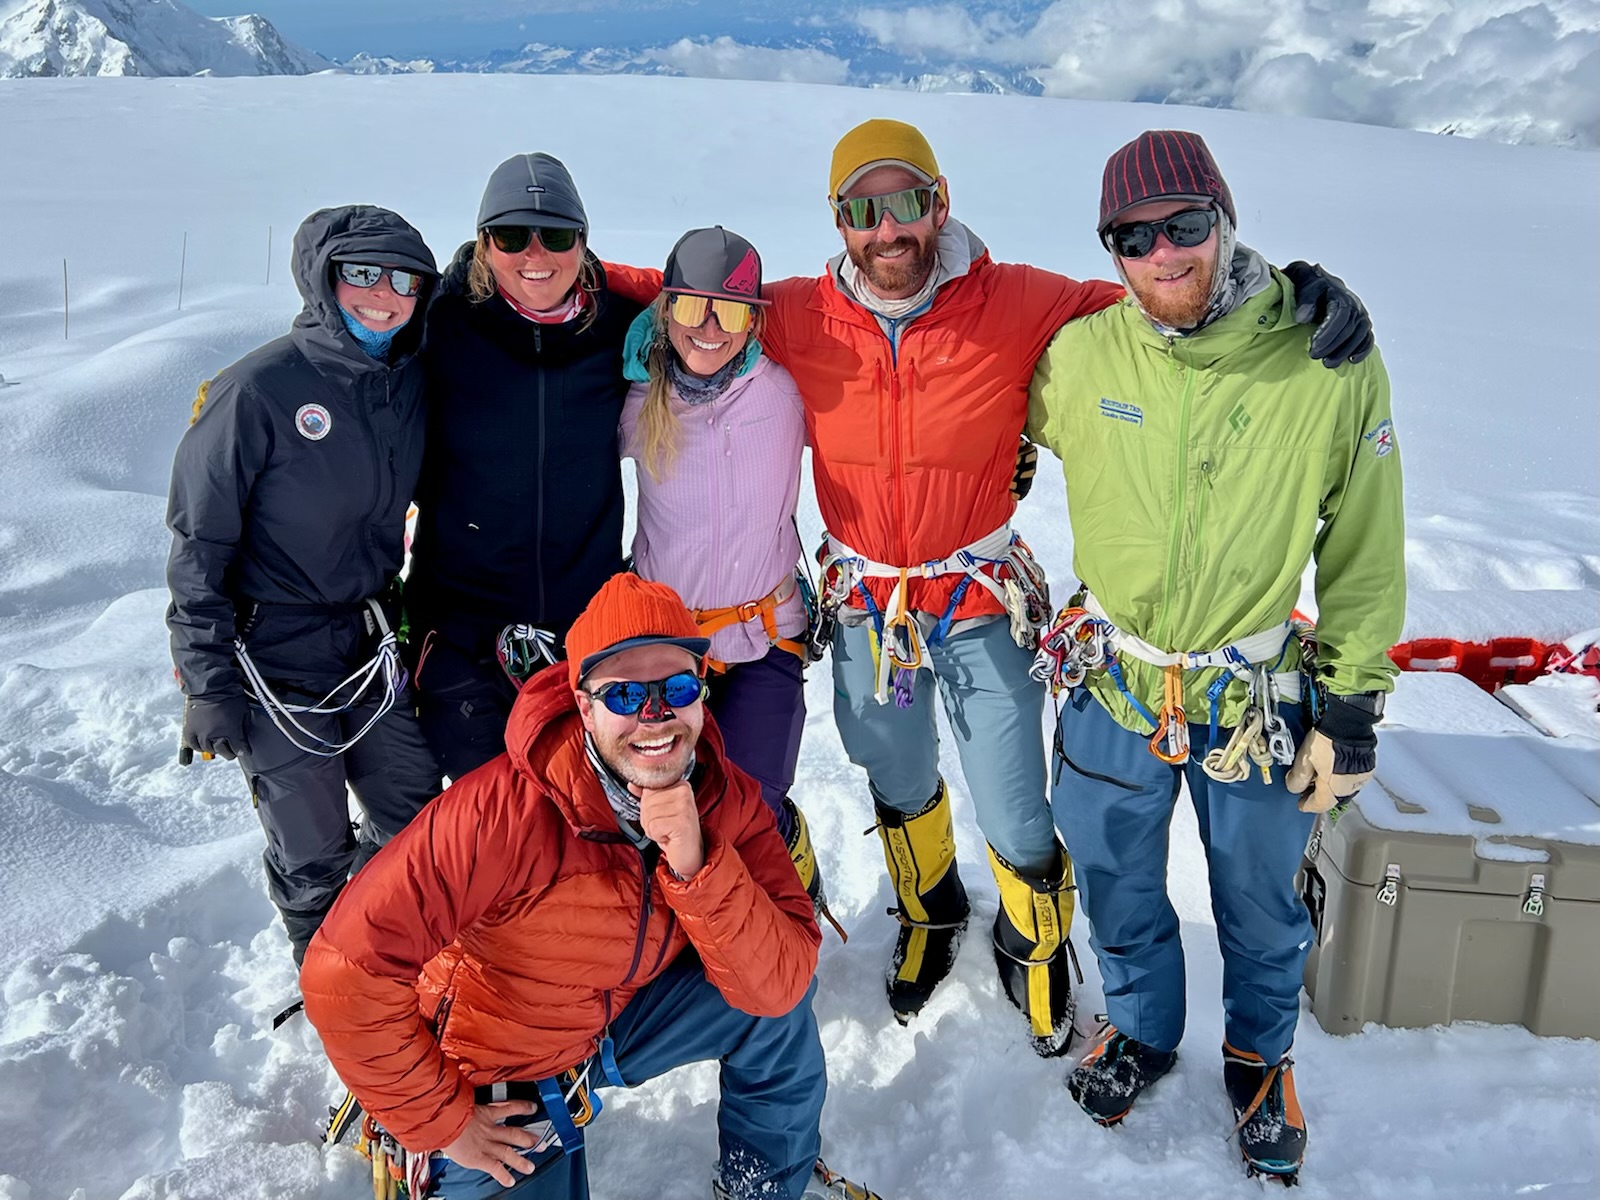 Six colorful mountaineers pose on a snowy glacier